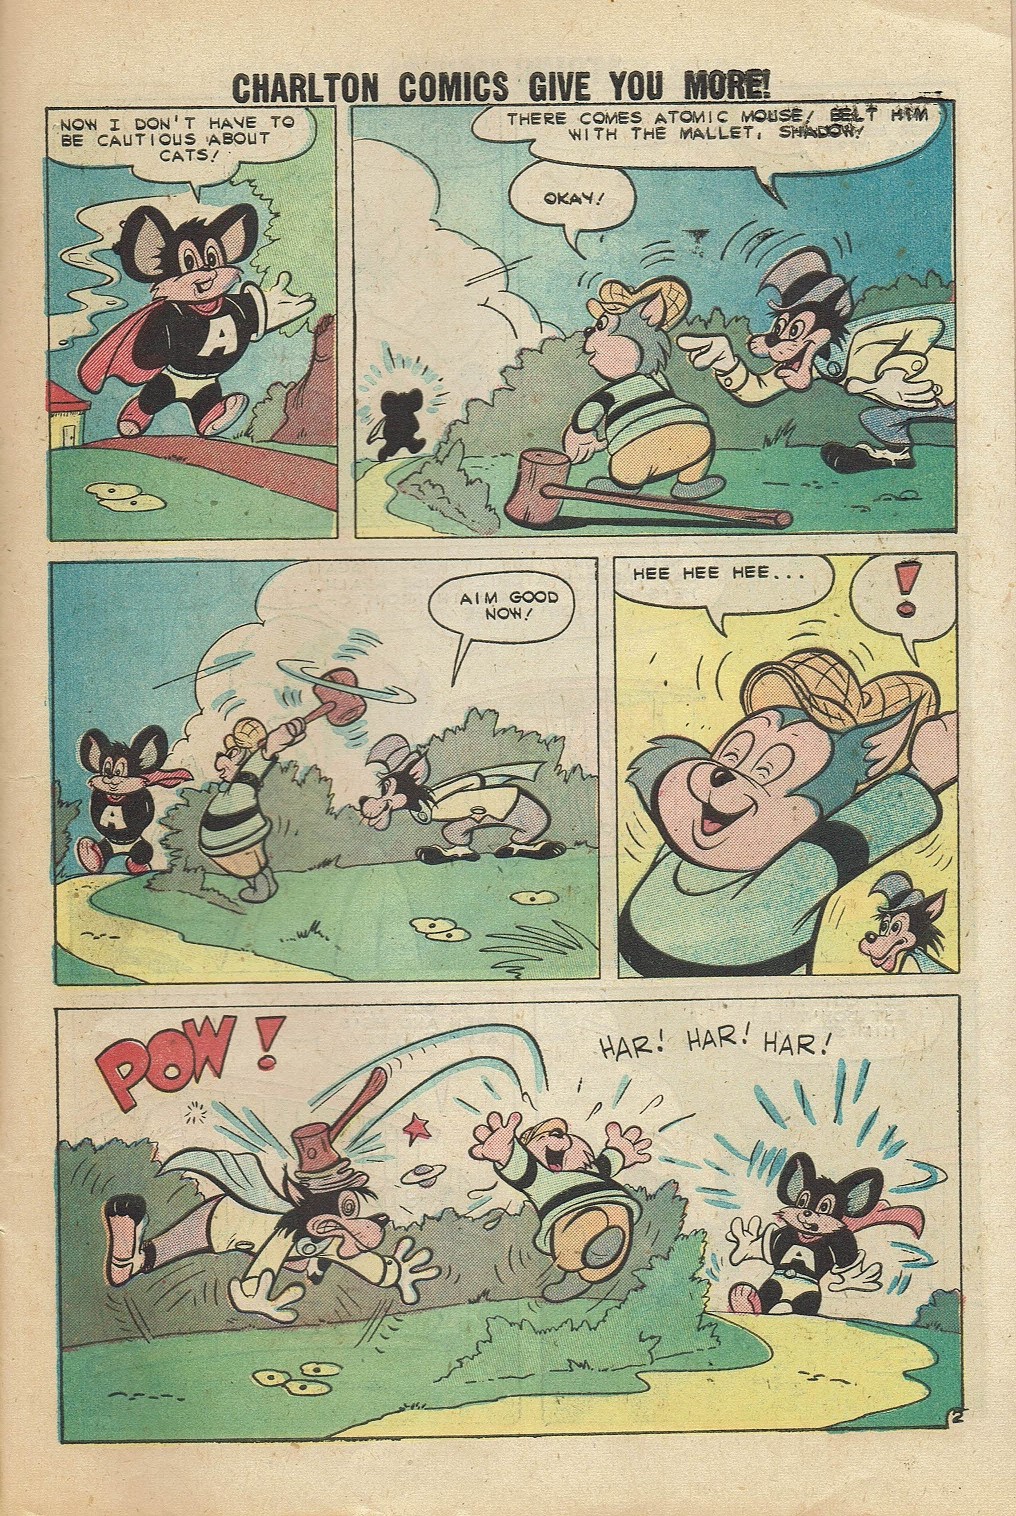 Read online Atomic Mouse comic -  Issue #33 - 27